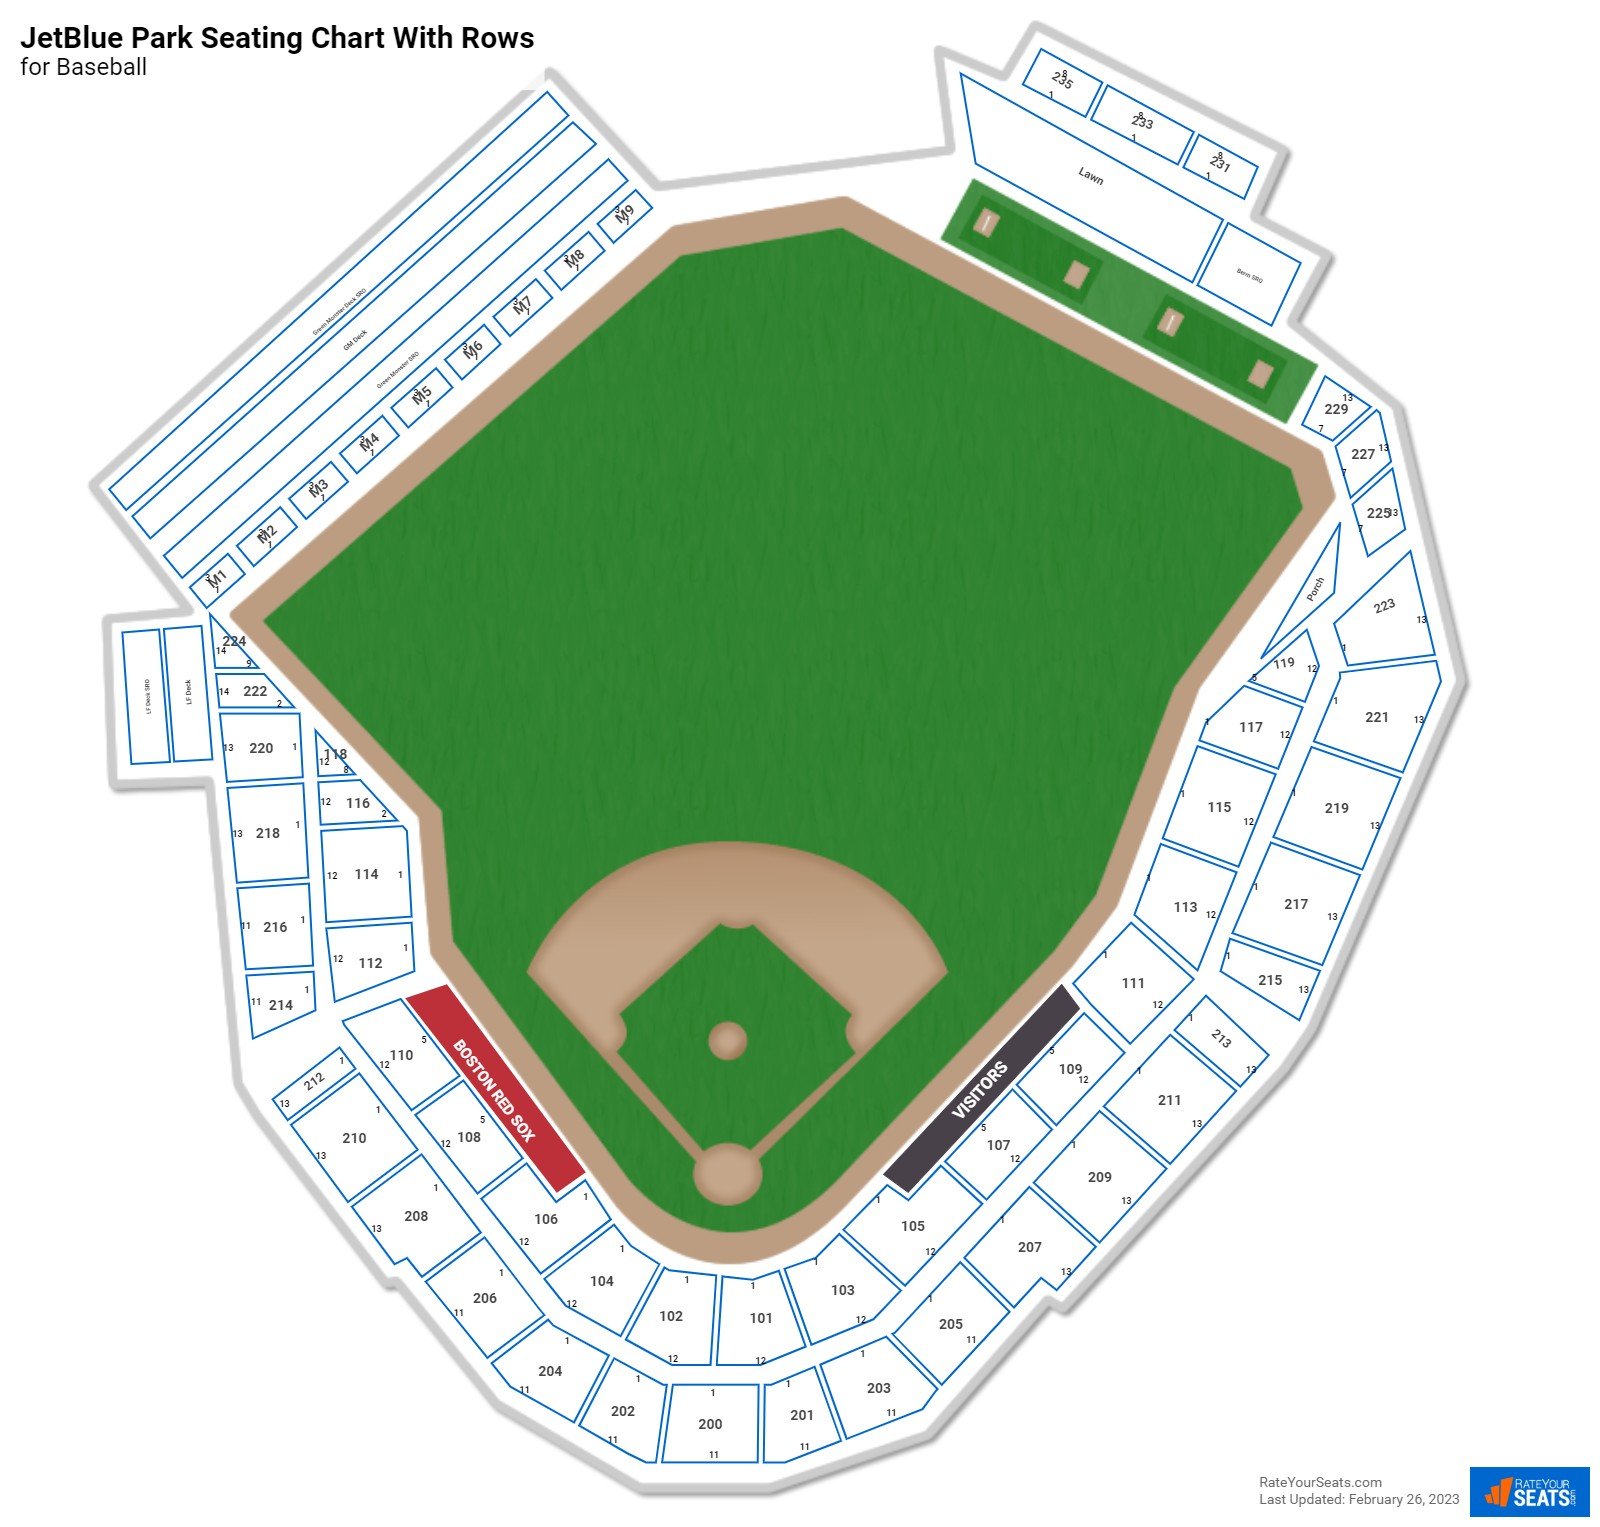 JetBlue Park seating chart with row numbers